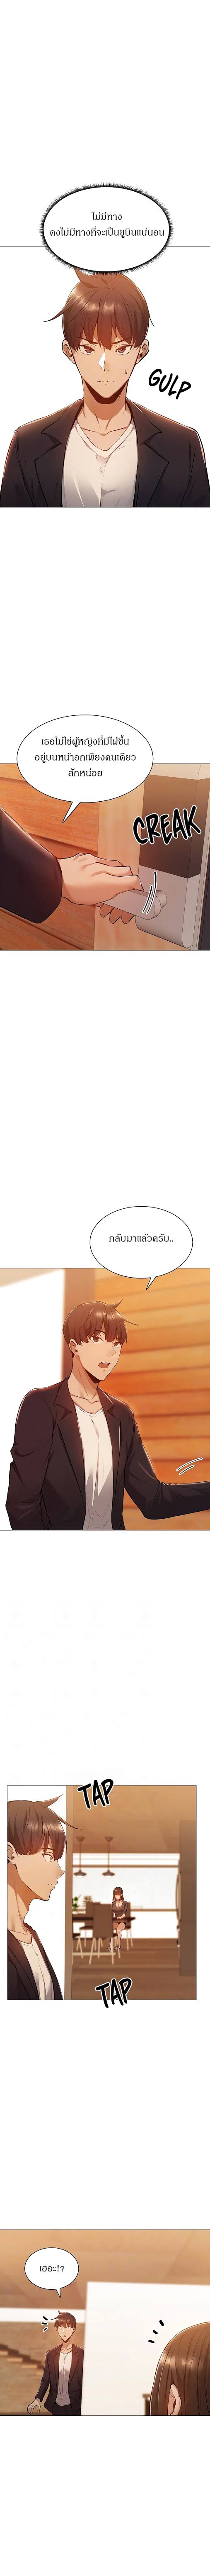 Is There an Empty Room? - หน้า 3